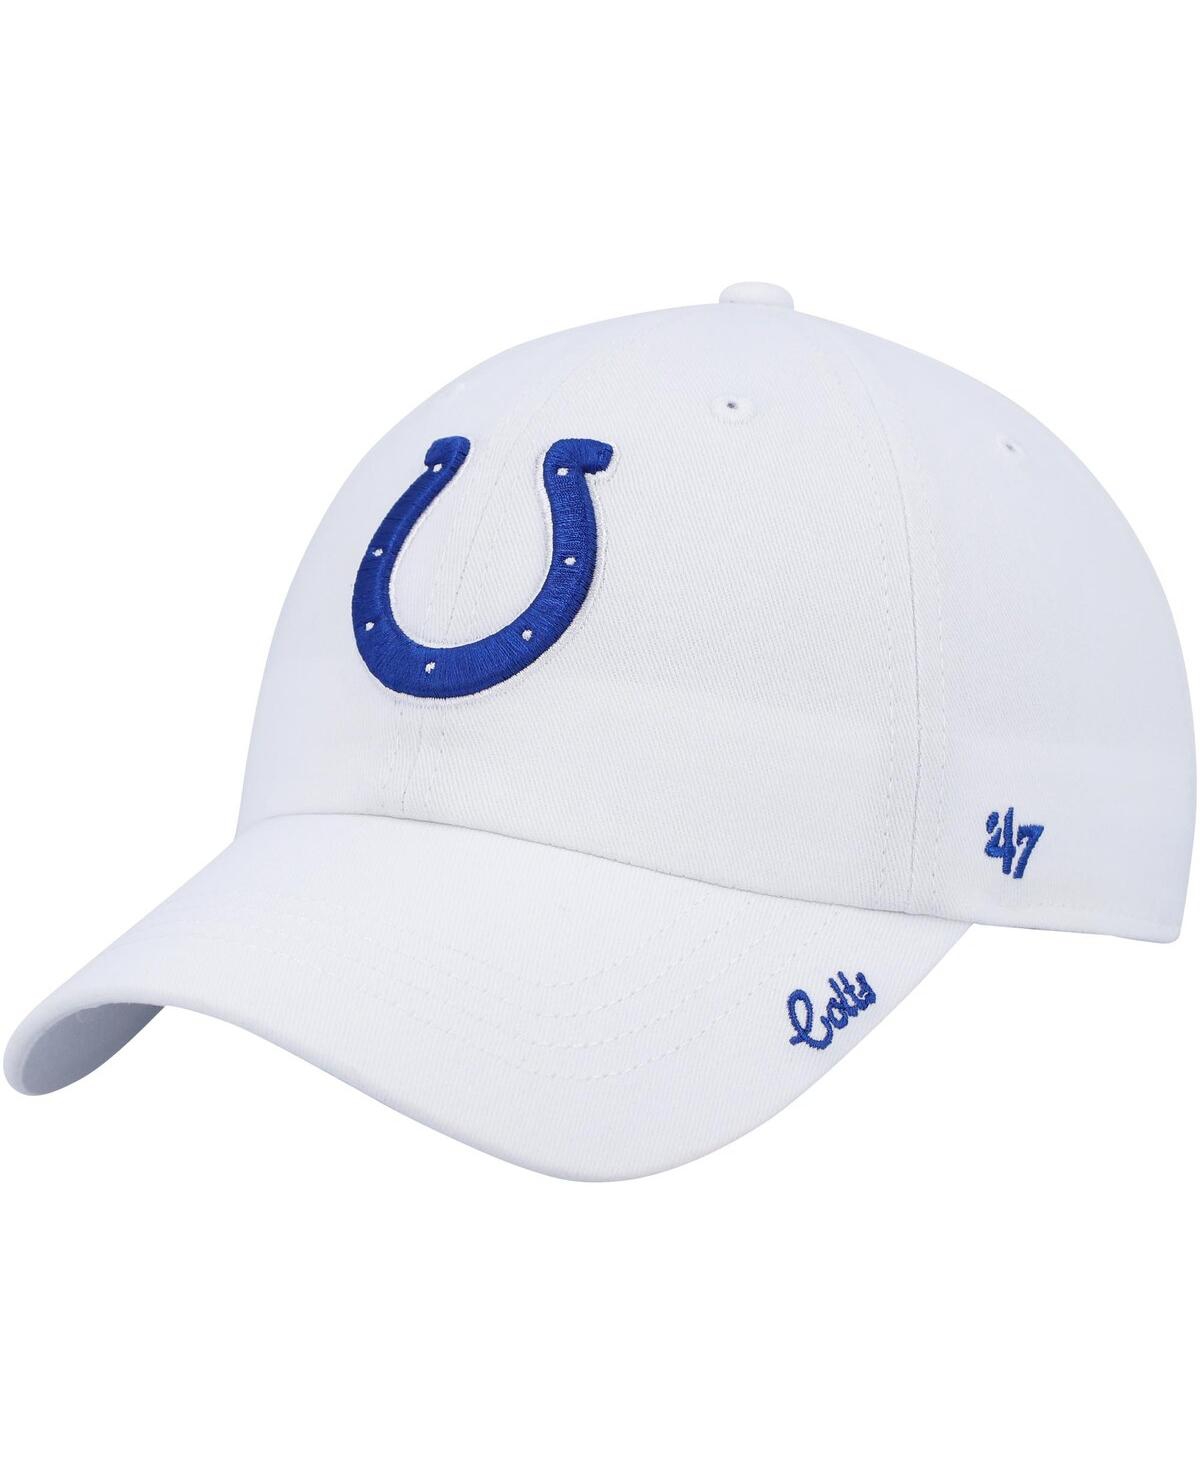 47 Brand Women's '47 White Indianapolis Colts Team Miata Clean Up Adjustable Hat